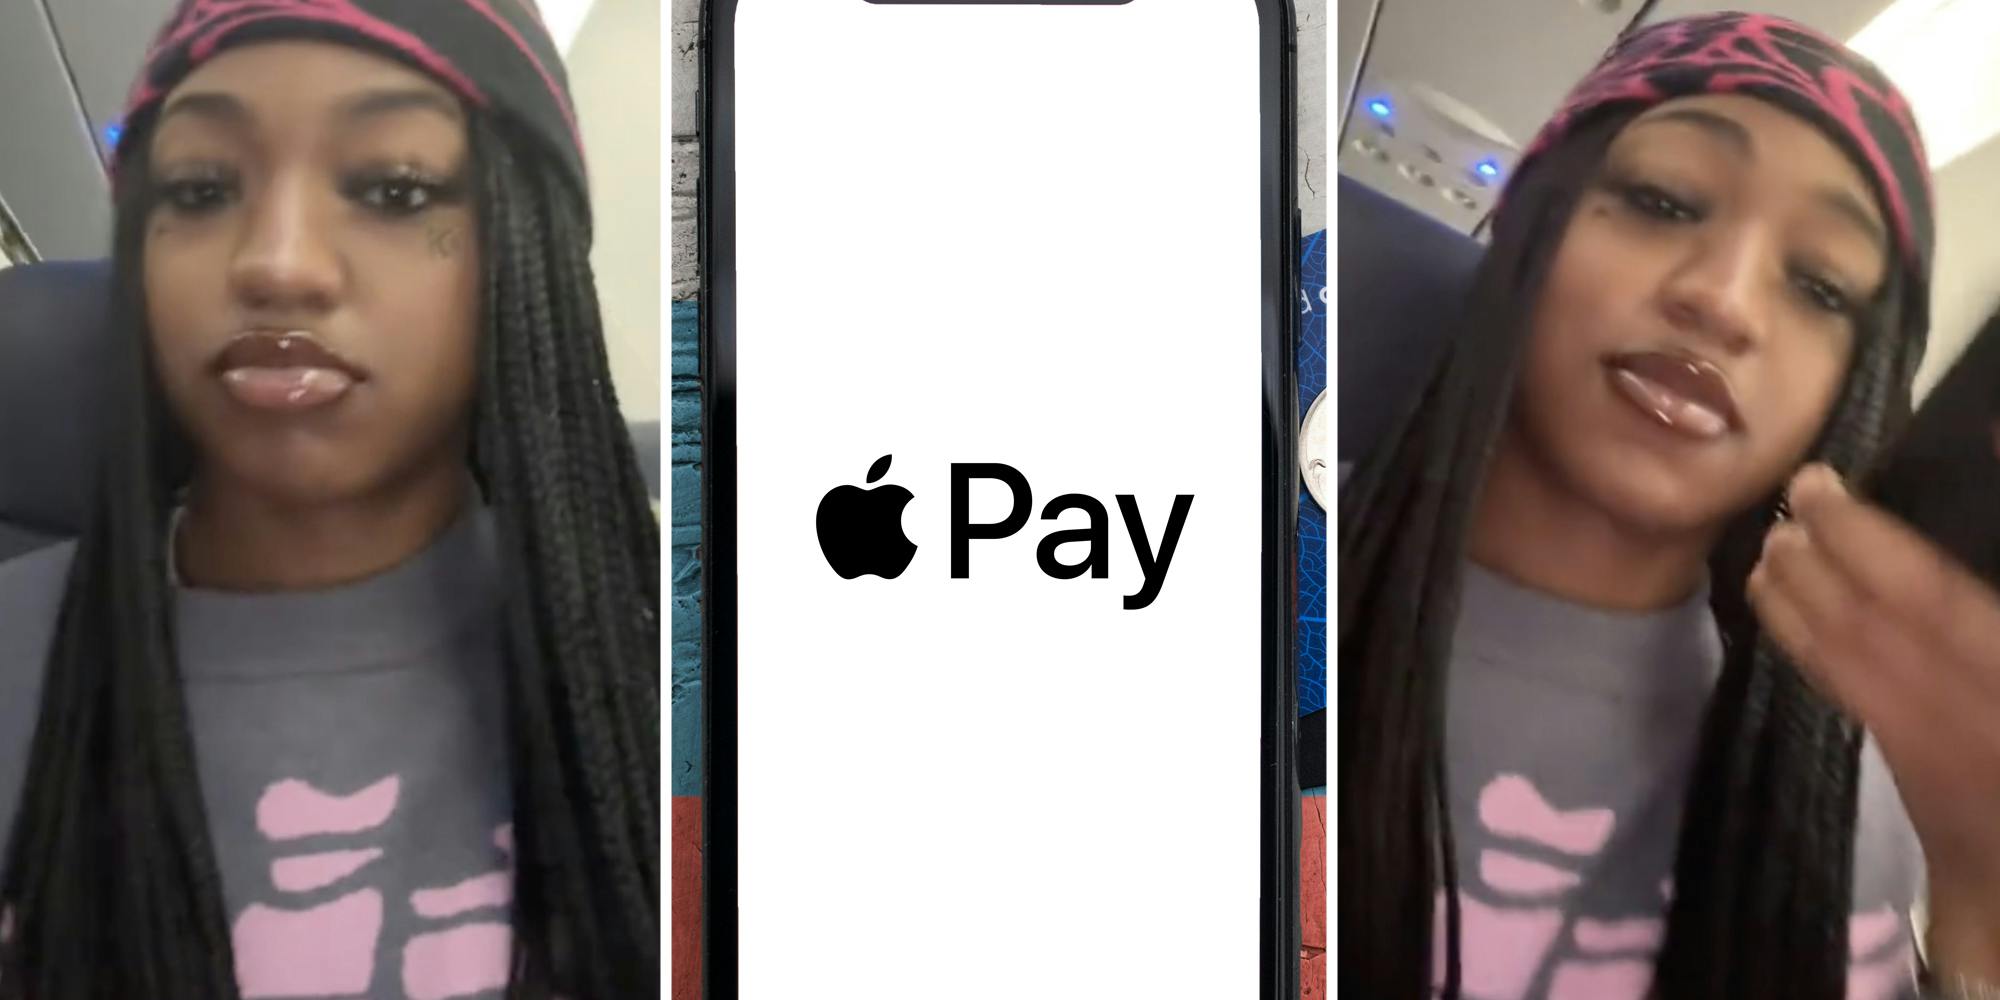 Woman Uses Apple Pay on Flight so Charges Don’t Go Through